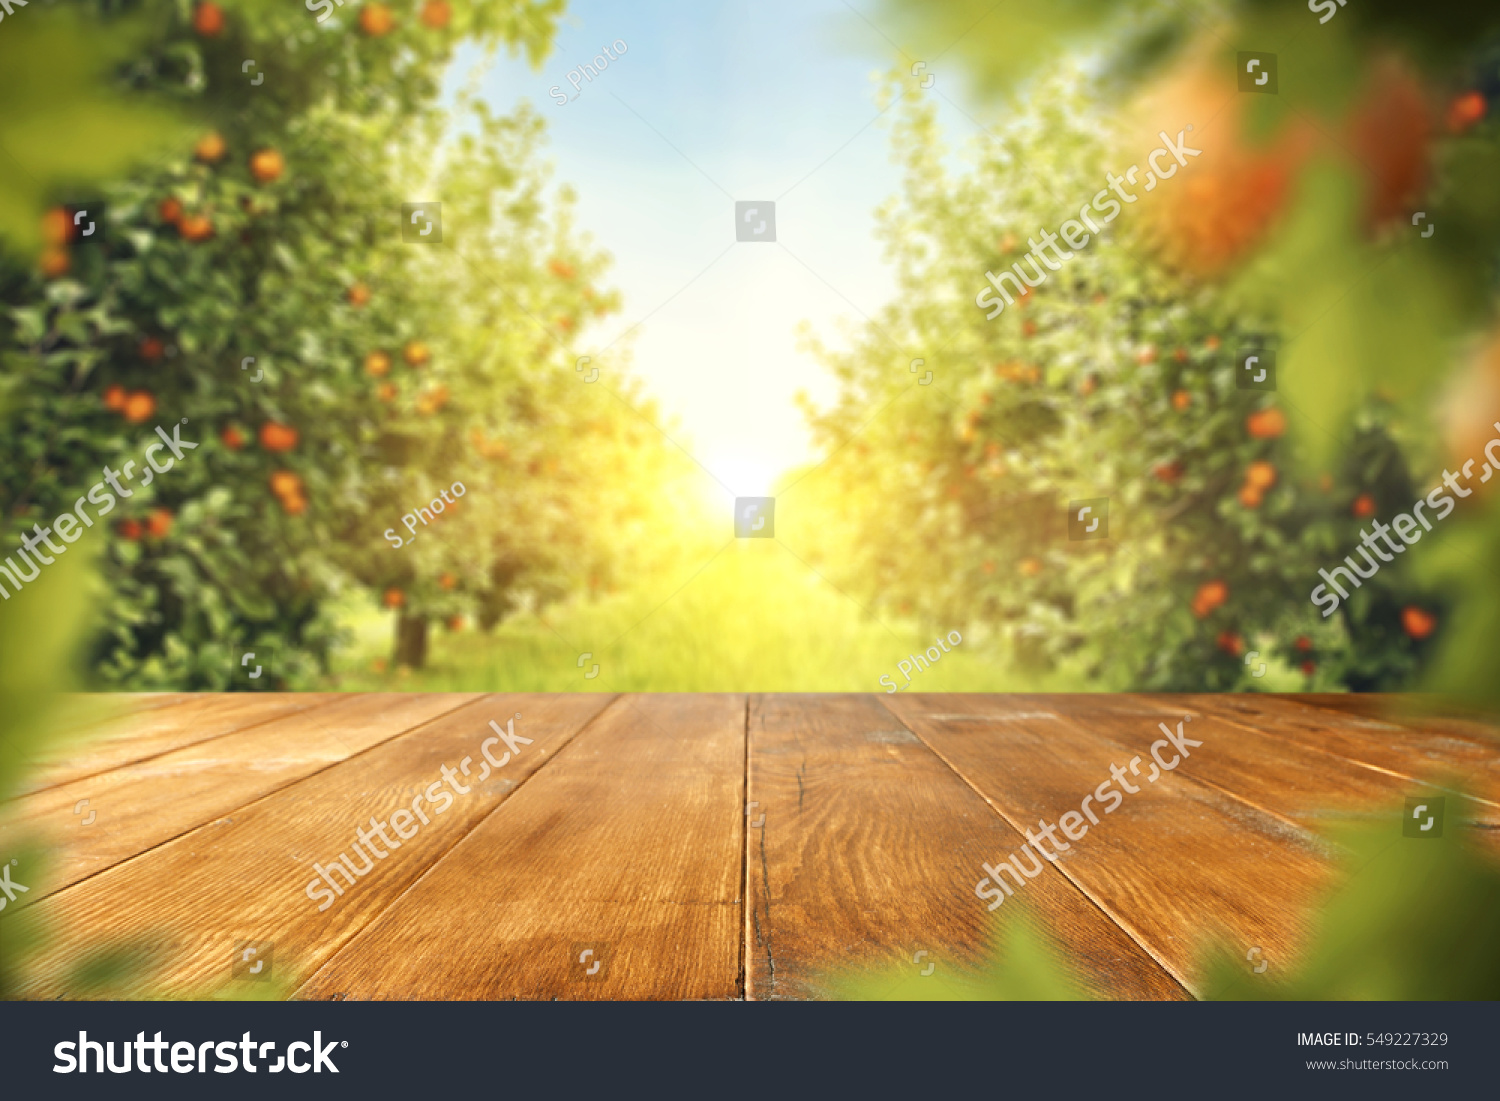 wooden table place of free space for your decoration and orange trees with fruits in sun light  #549227329